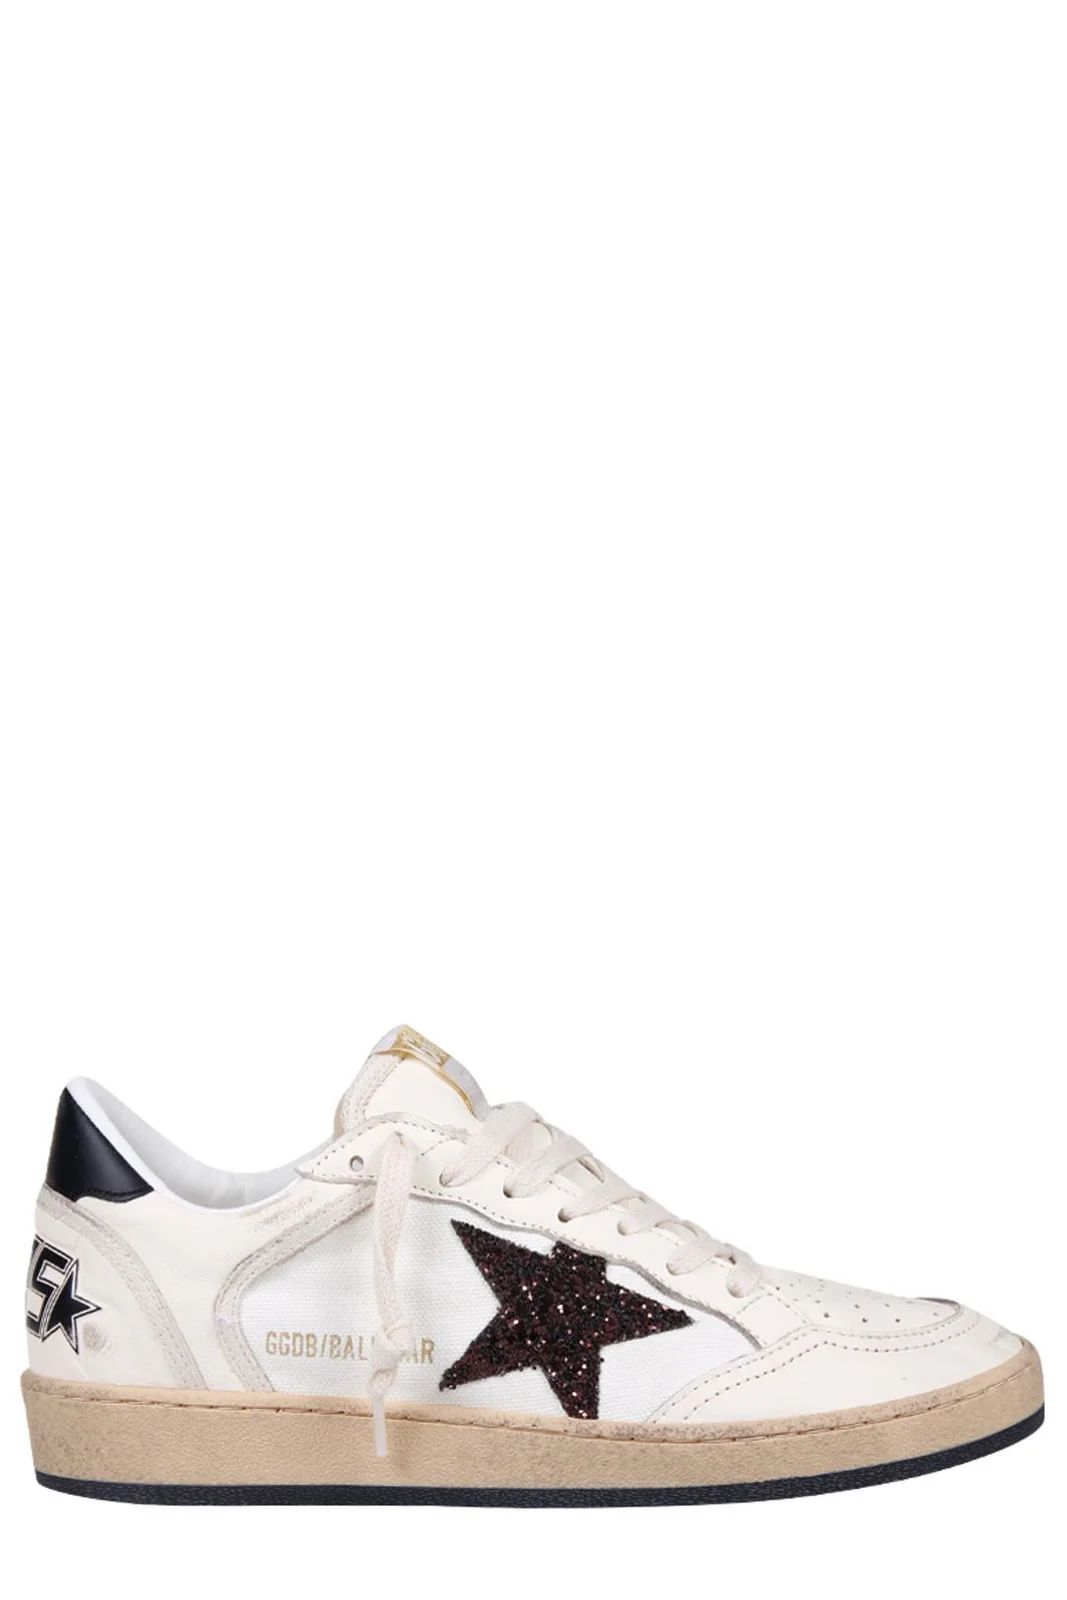 Golden Goose Deluxe Brand Star-Patch Low-Top Sneakers | Cettire Global